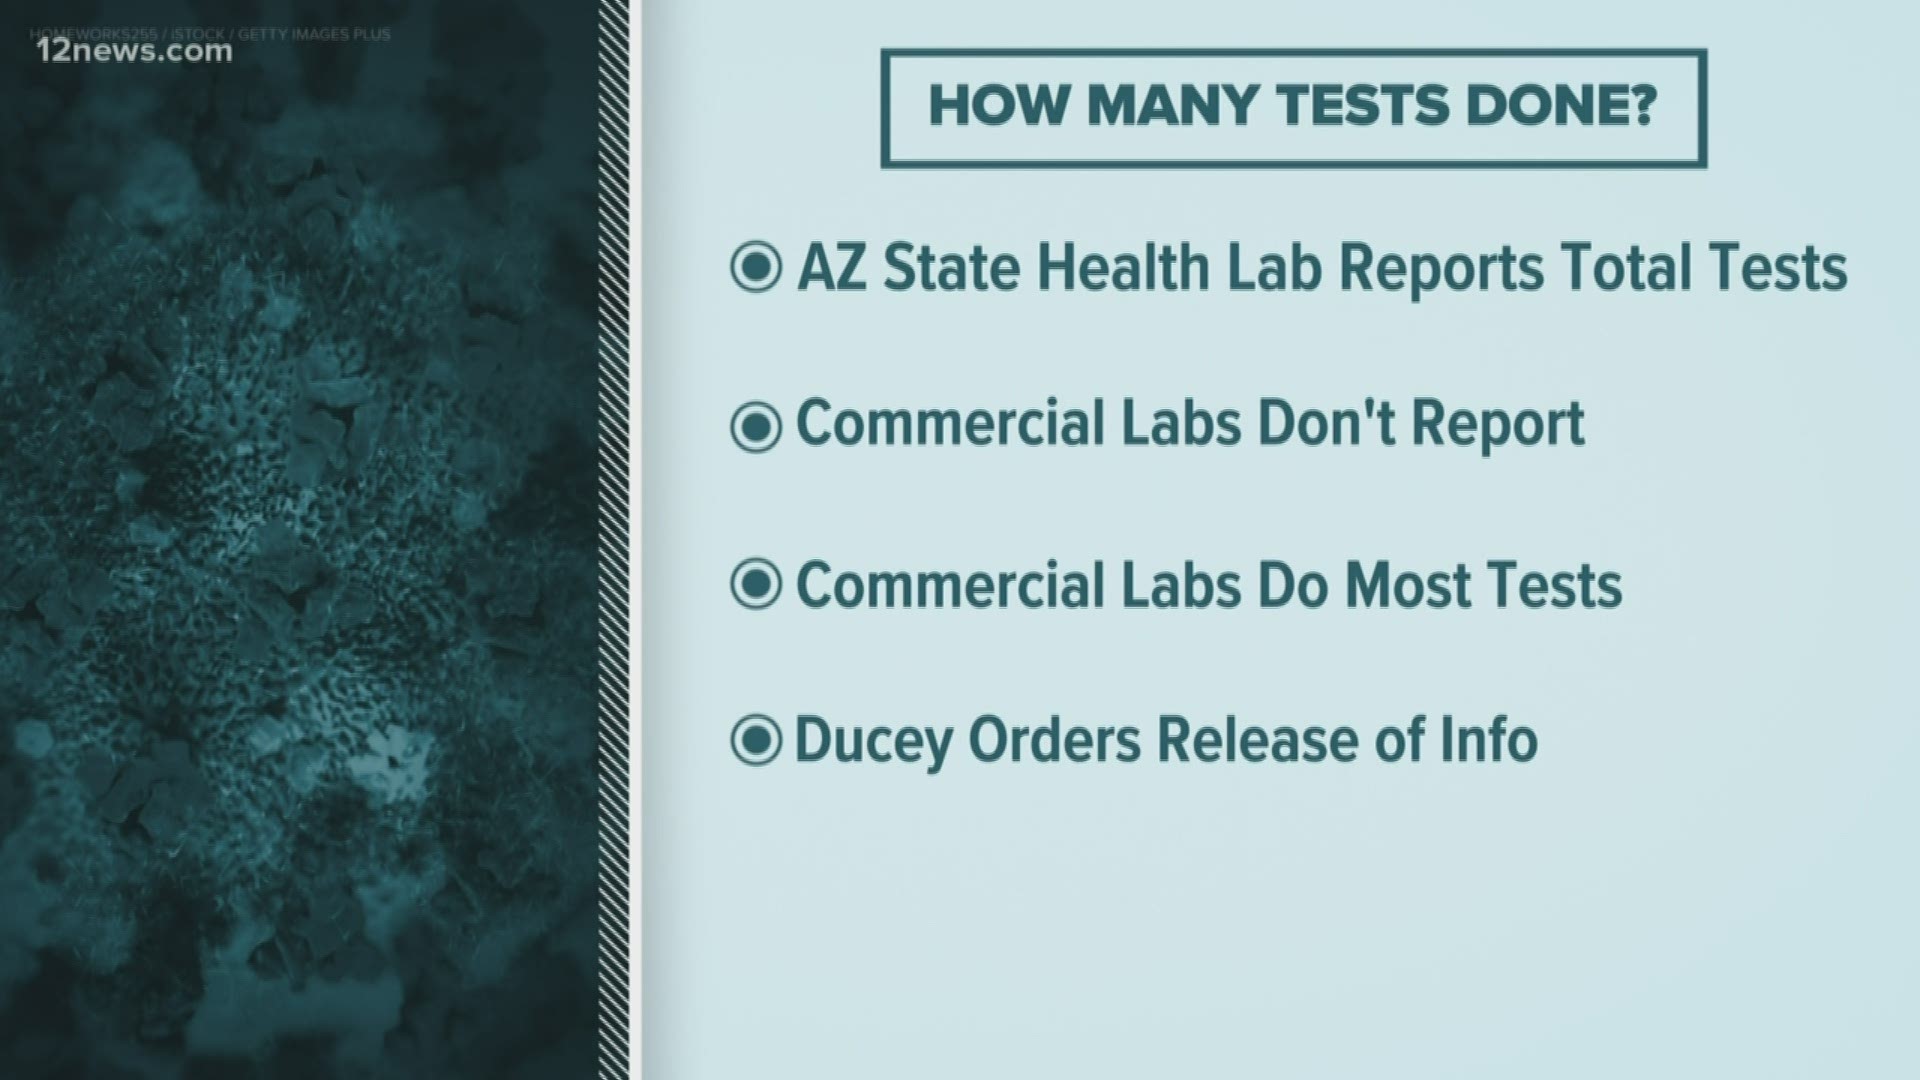 Arizona's governor issued an executive order that would delay evictions of renter affected by COVID-19. He also ordered private labs to report coronavirus test info.